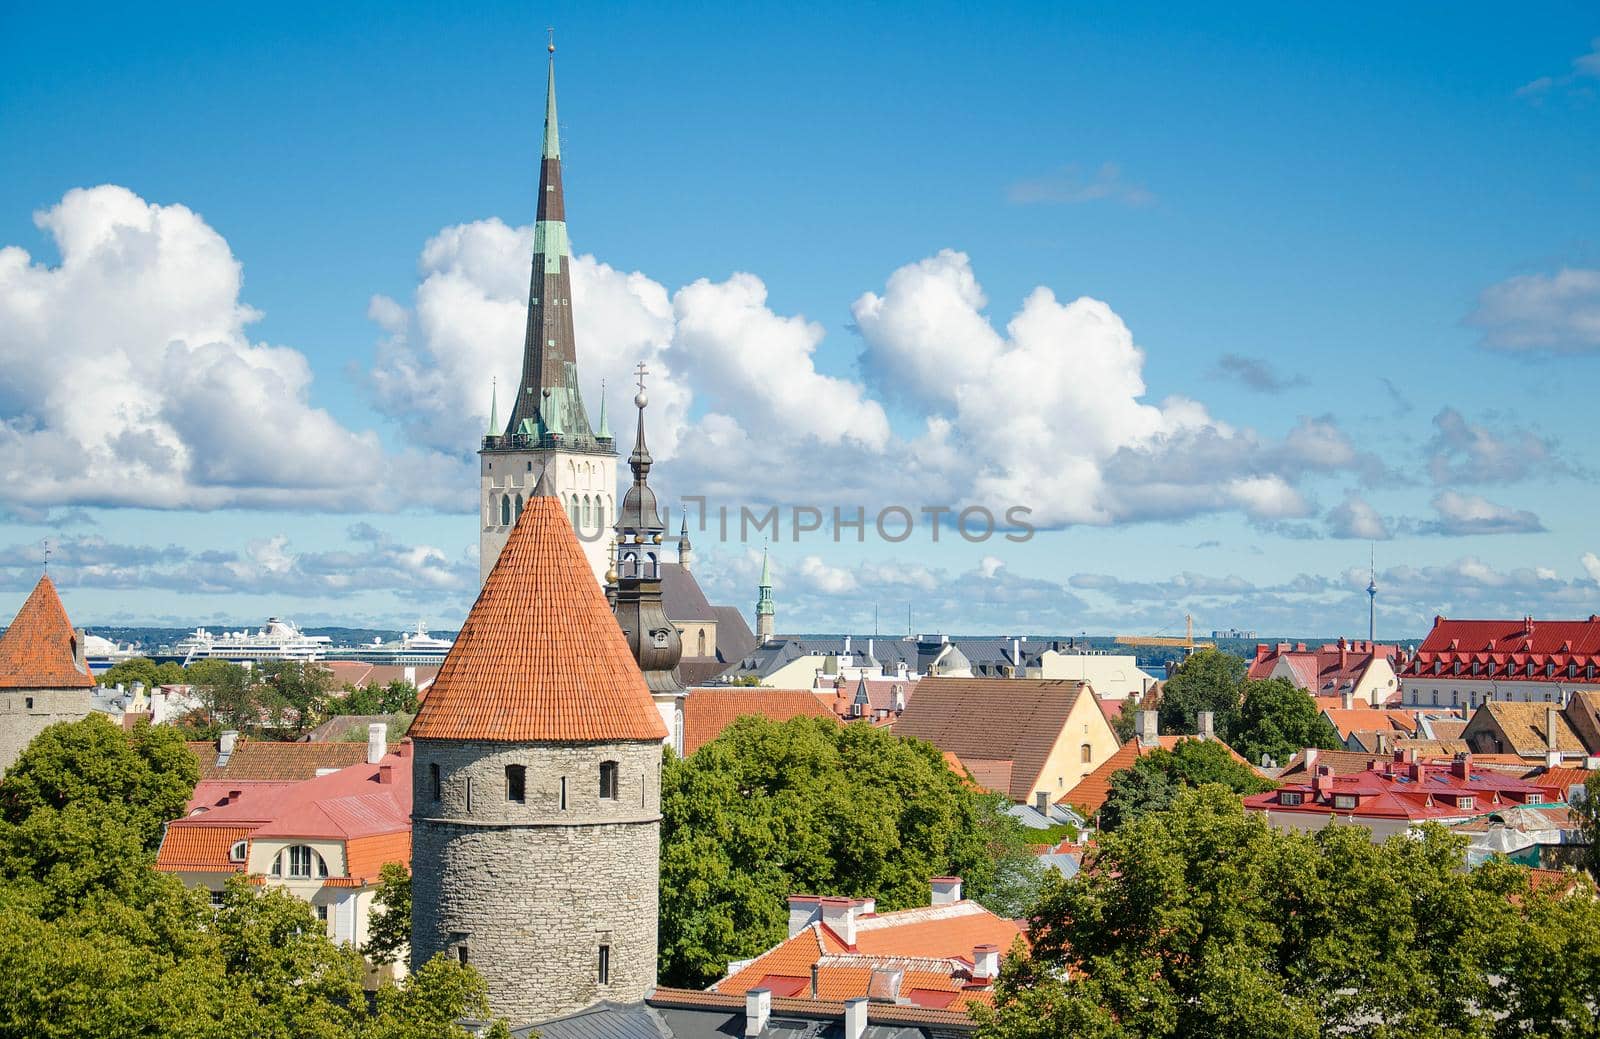 Panoramic view of Old Town of Tallinn with traditional red tile roofs, medieval churches, towers and walls, from Patkuli Vaateplatvorm Toompea Hill, Estonia